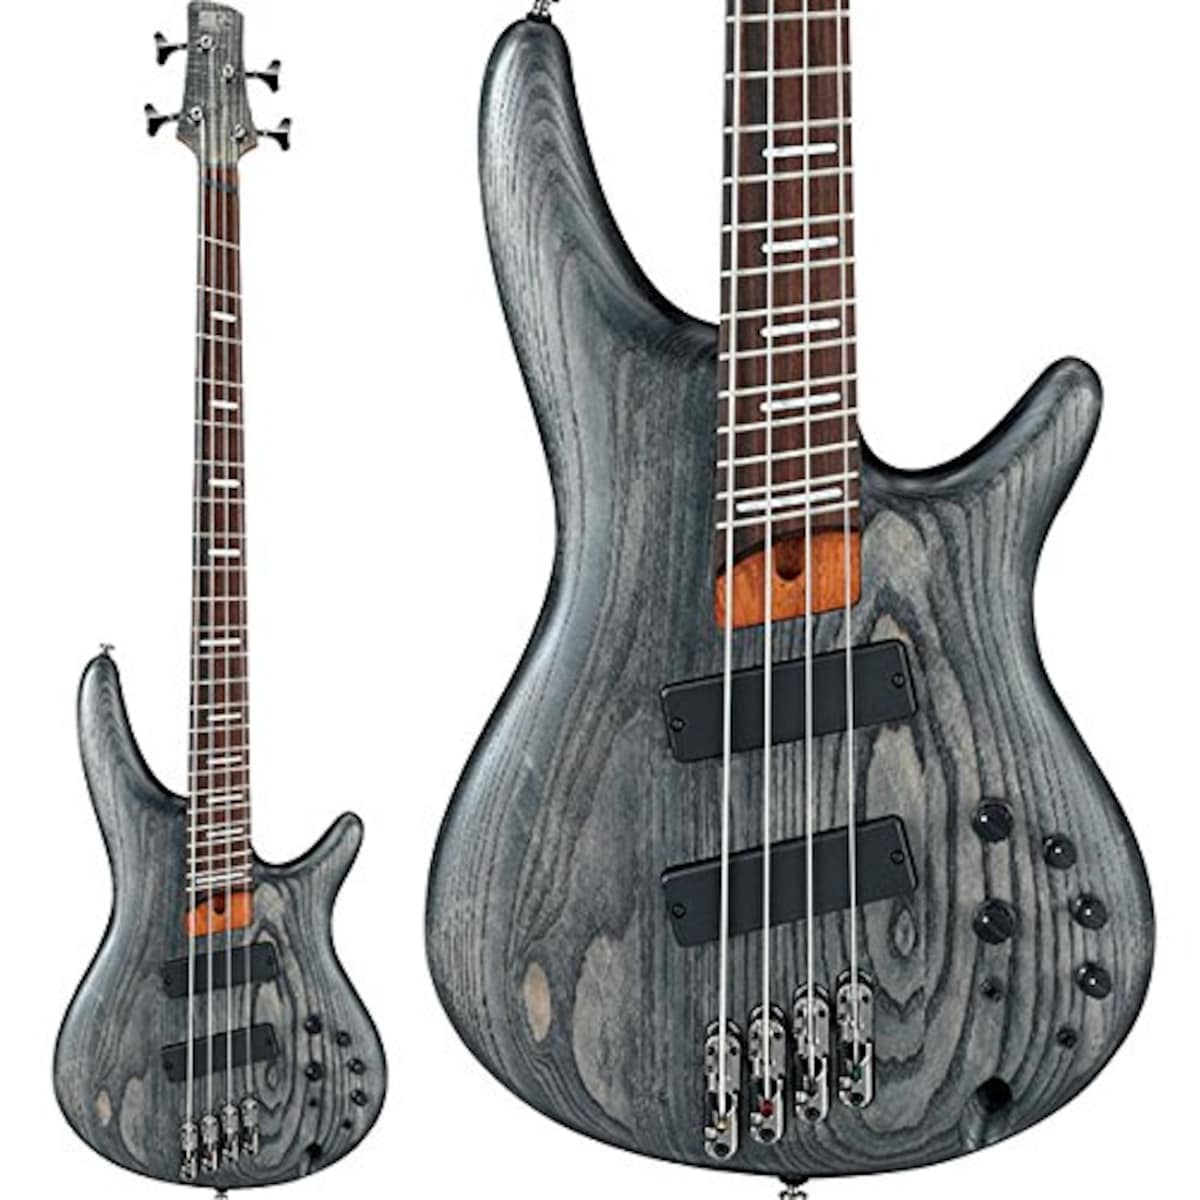 Bass Work Shop Series   SRFF800-BKS Black Stained アイバニーズ